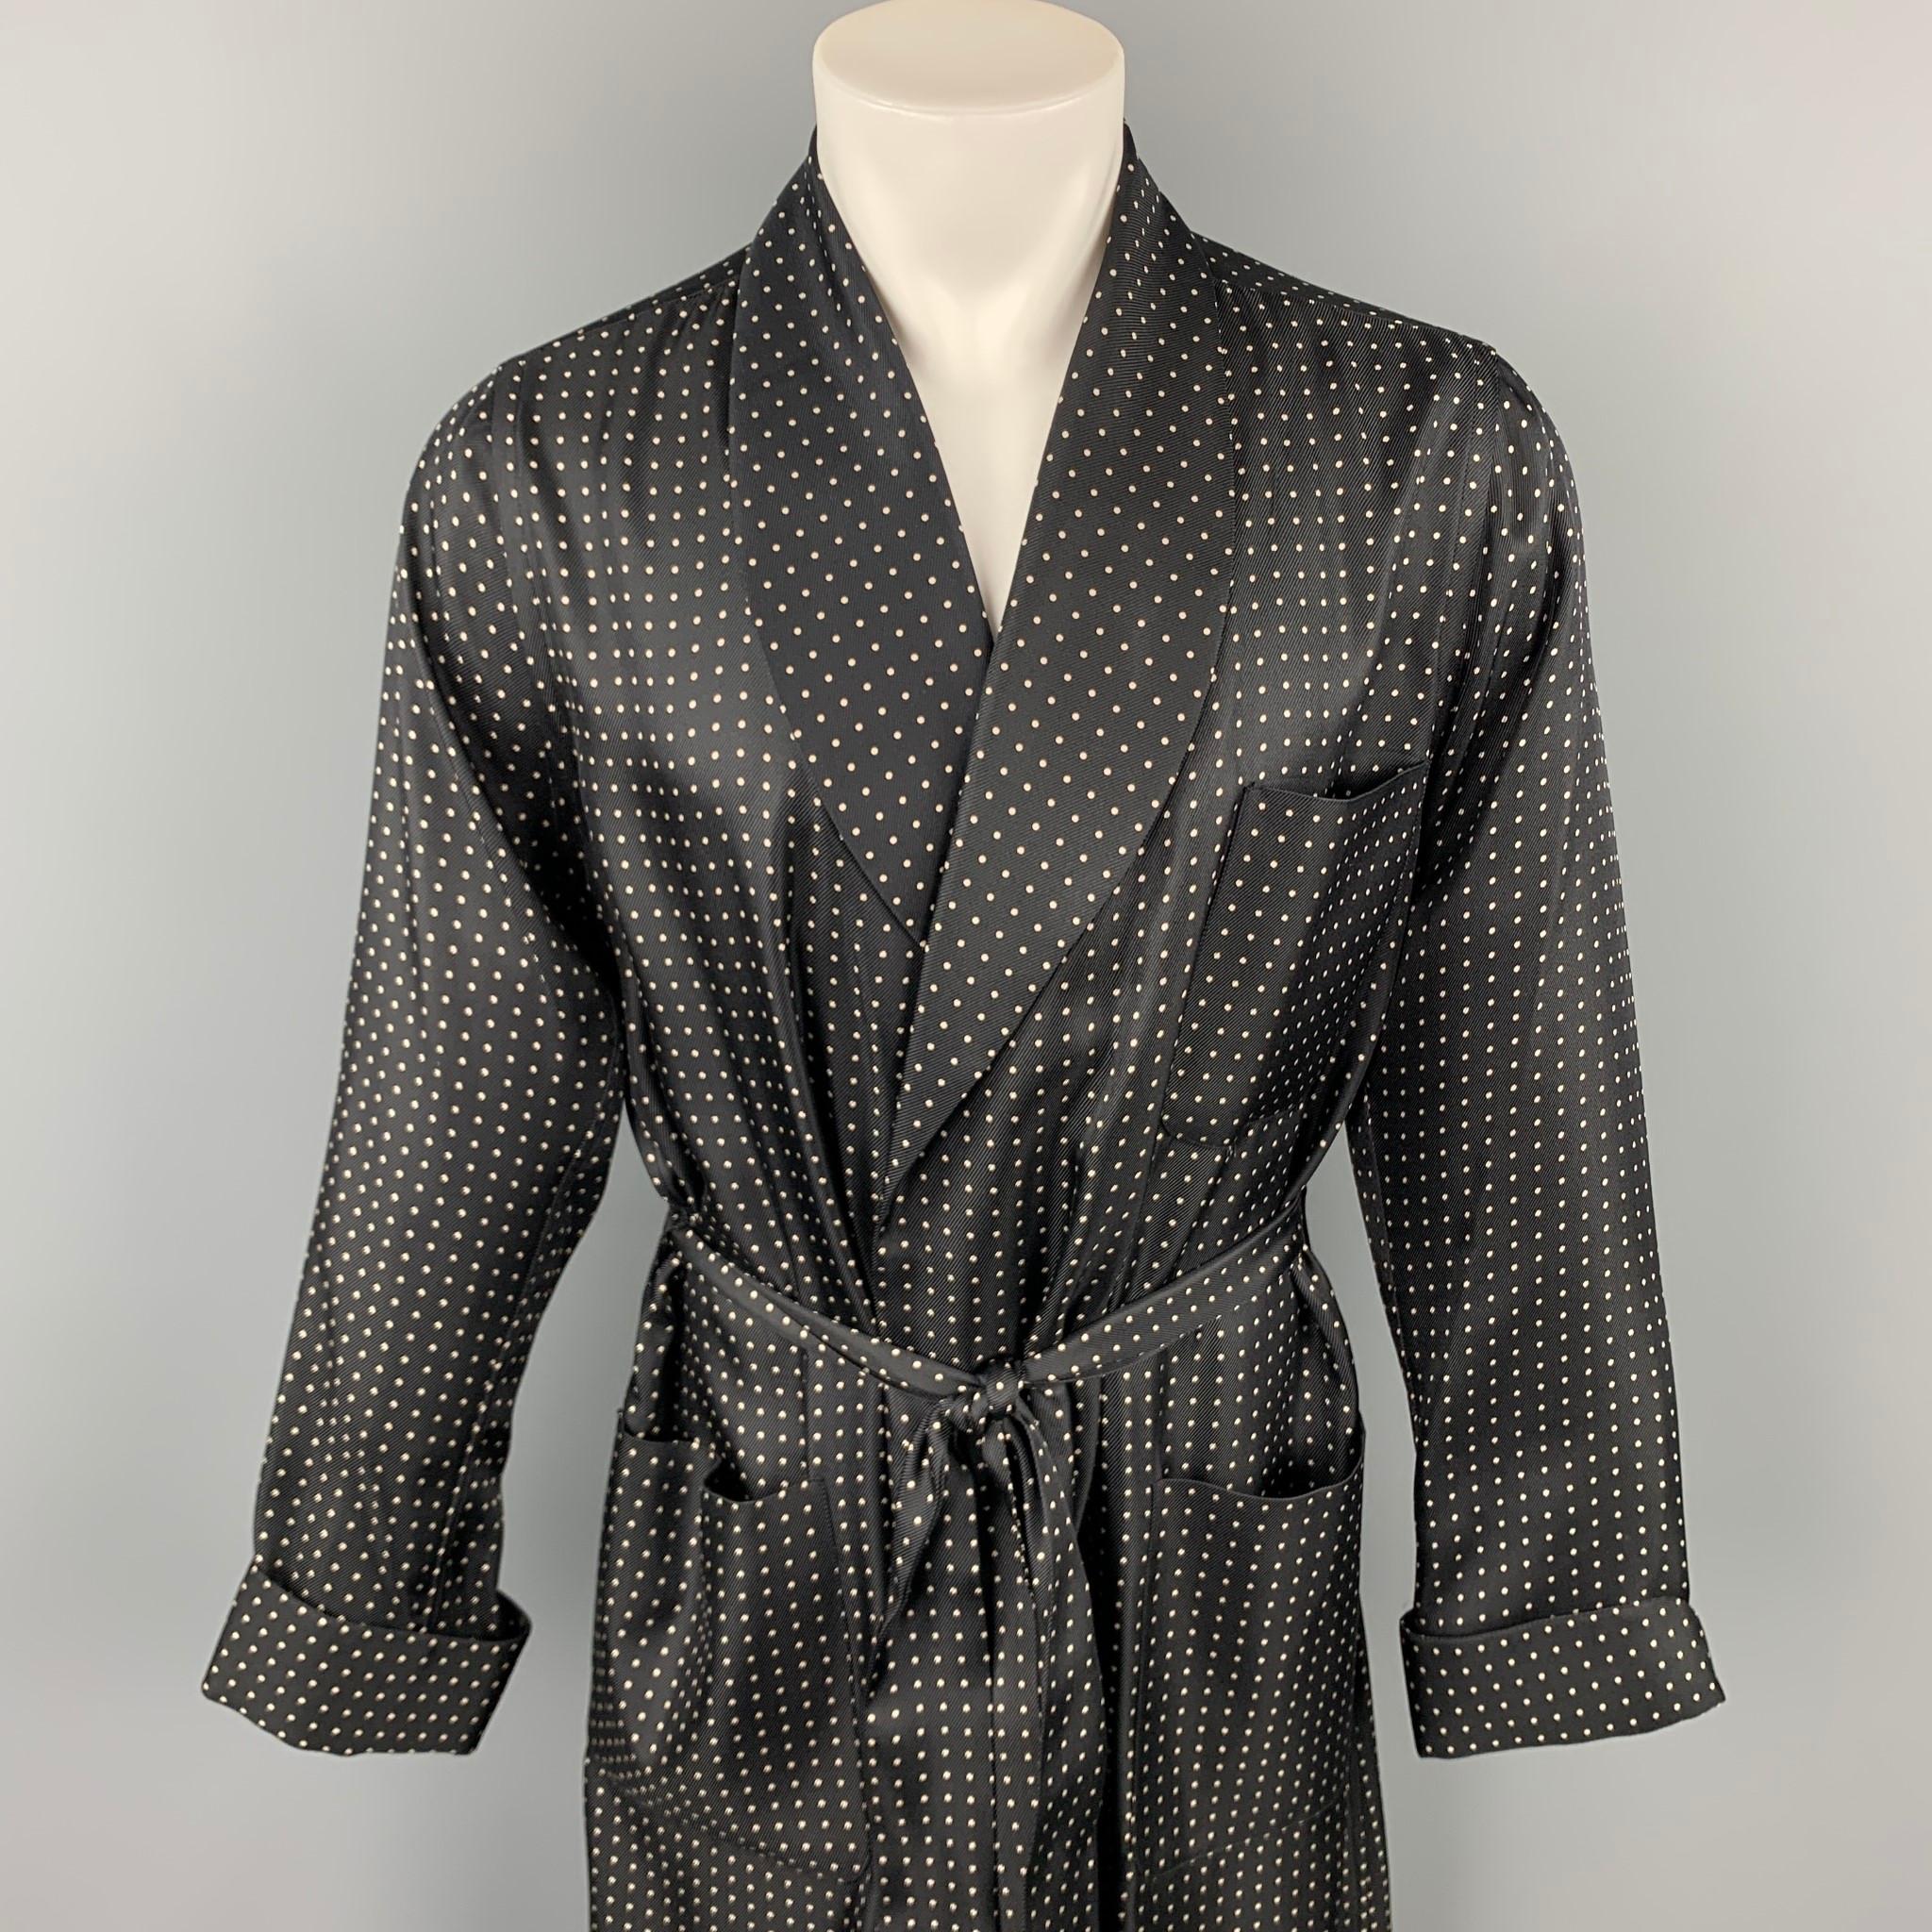 RALPH LAUREN Purple Label robe comes in a black & white polka dot silk featuring a shawl lapel, open front, patch pockets, and a belted closure. Made in Italy.

New With Tags. 
Marked: S
Original Retail Price: $1,750.00

Measurements:

Shoulder: 18